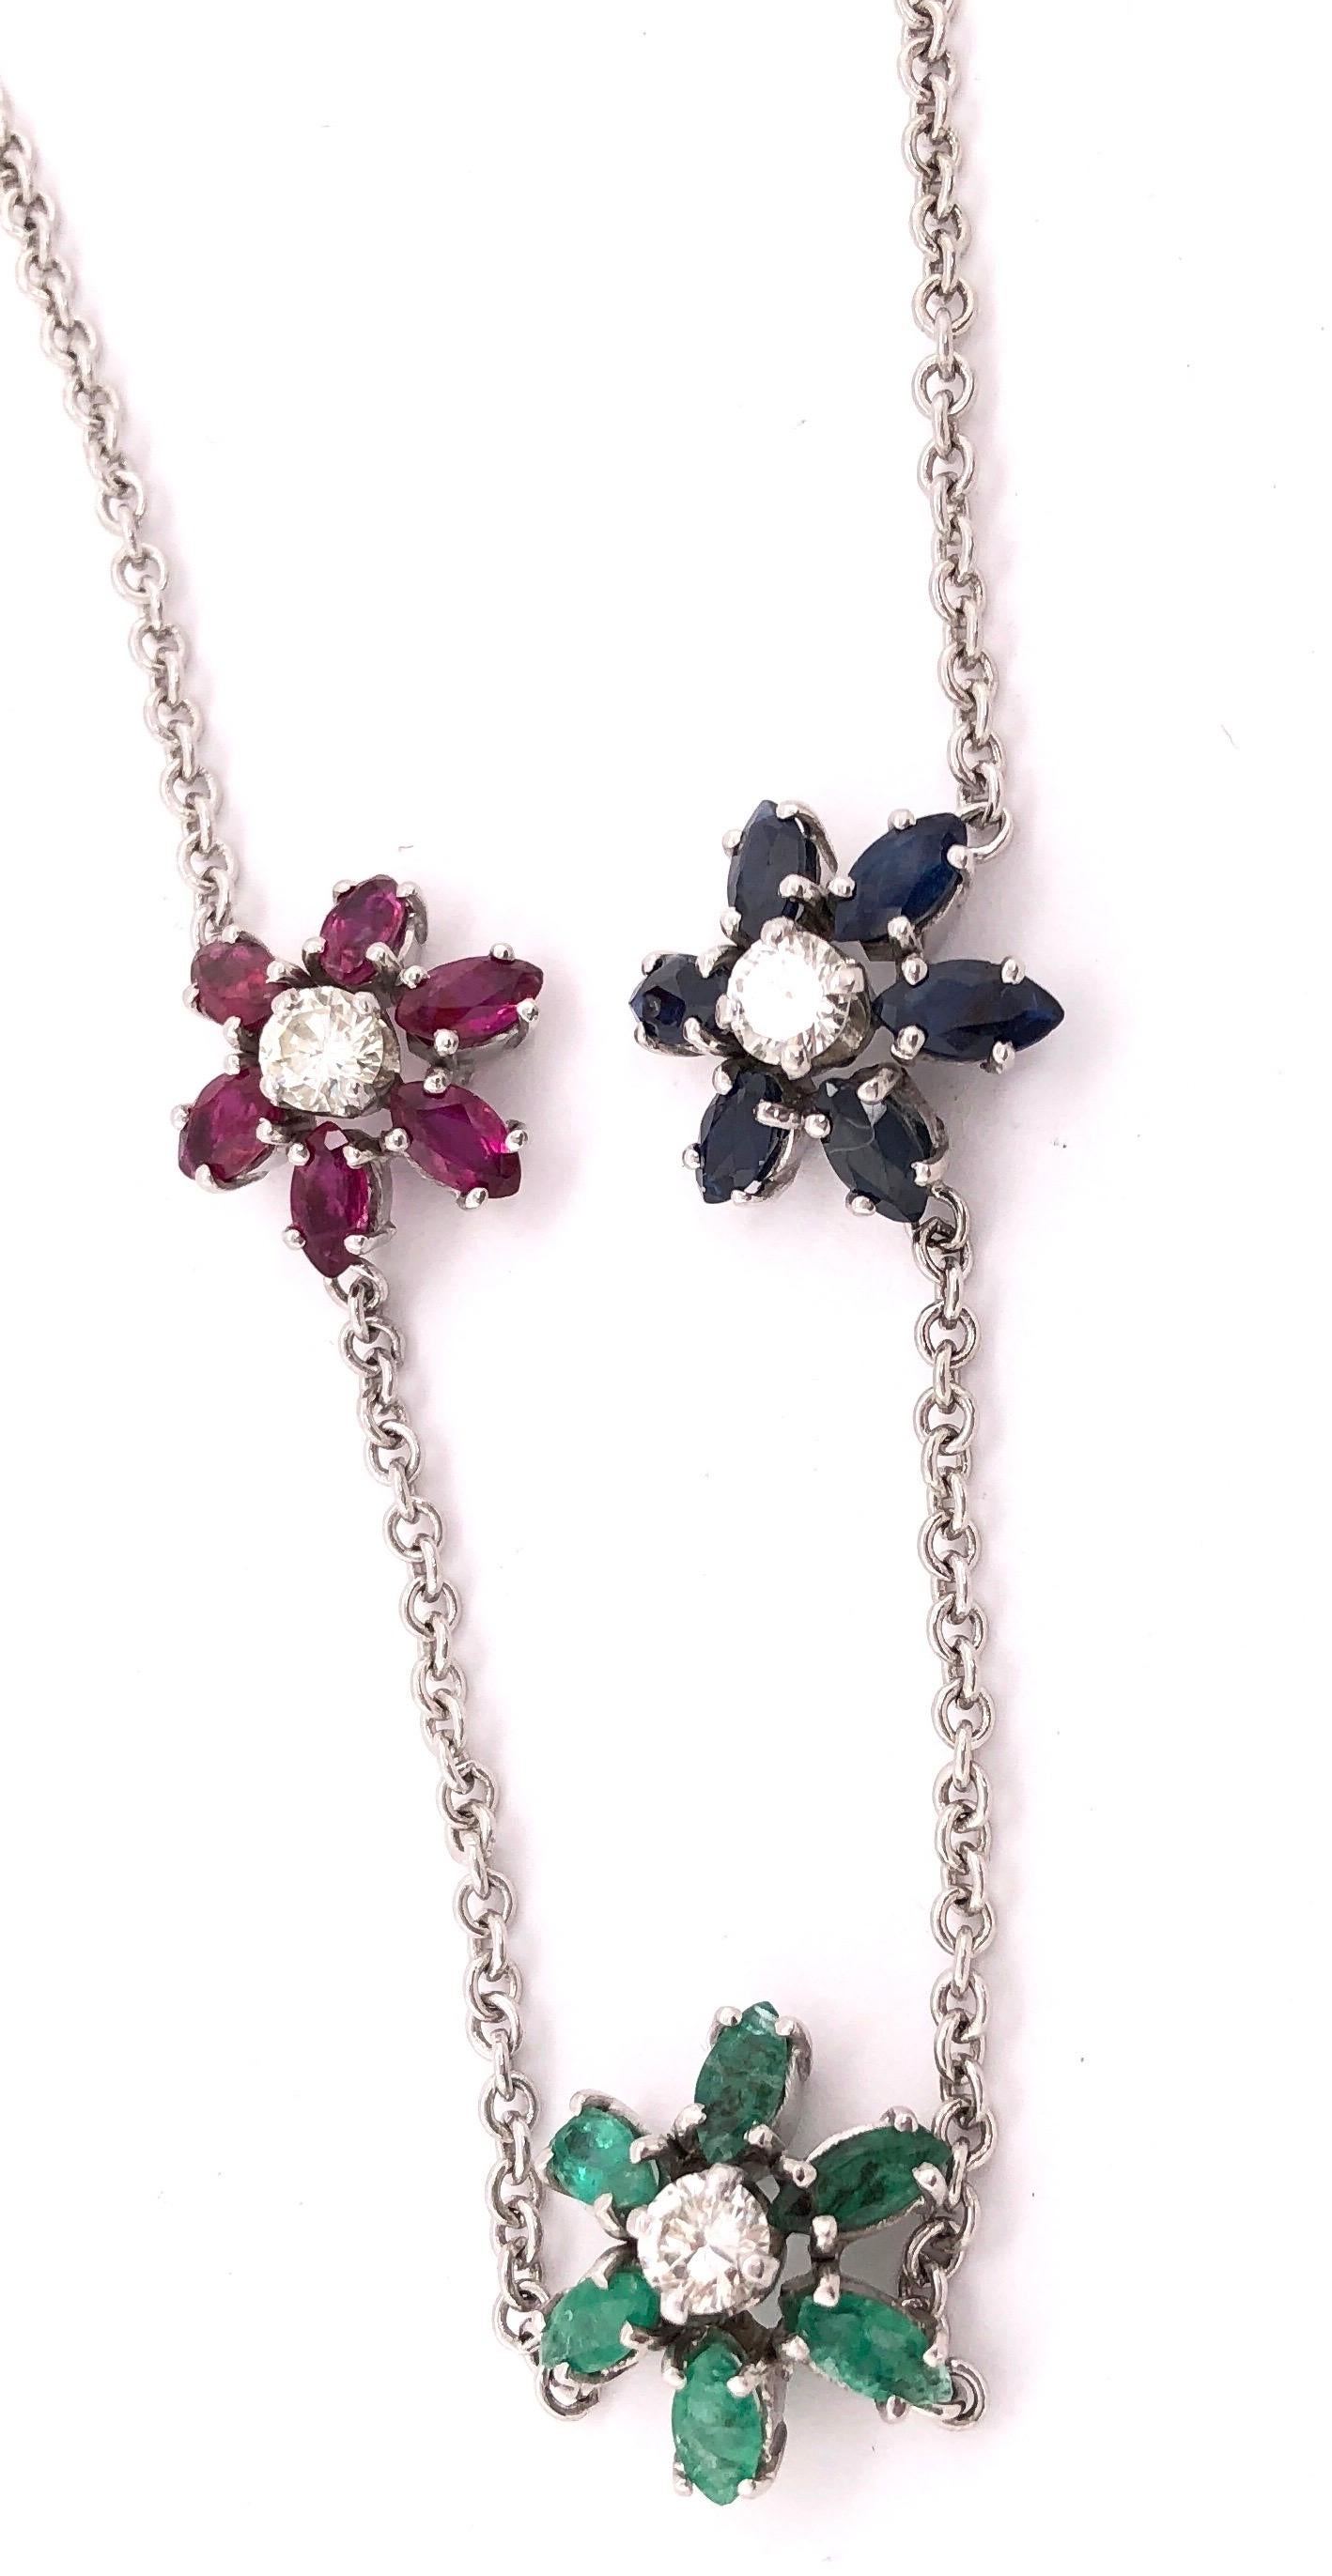 14 Karat Gold Necklace with 3 Flowers in Ruby Sapphire Emerald with Diamonds In Good Condition For Sale In Stamford, CT